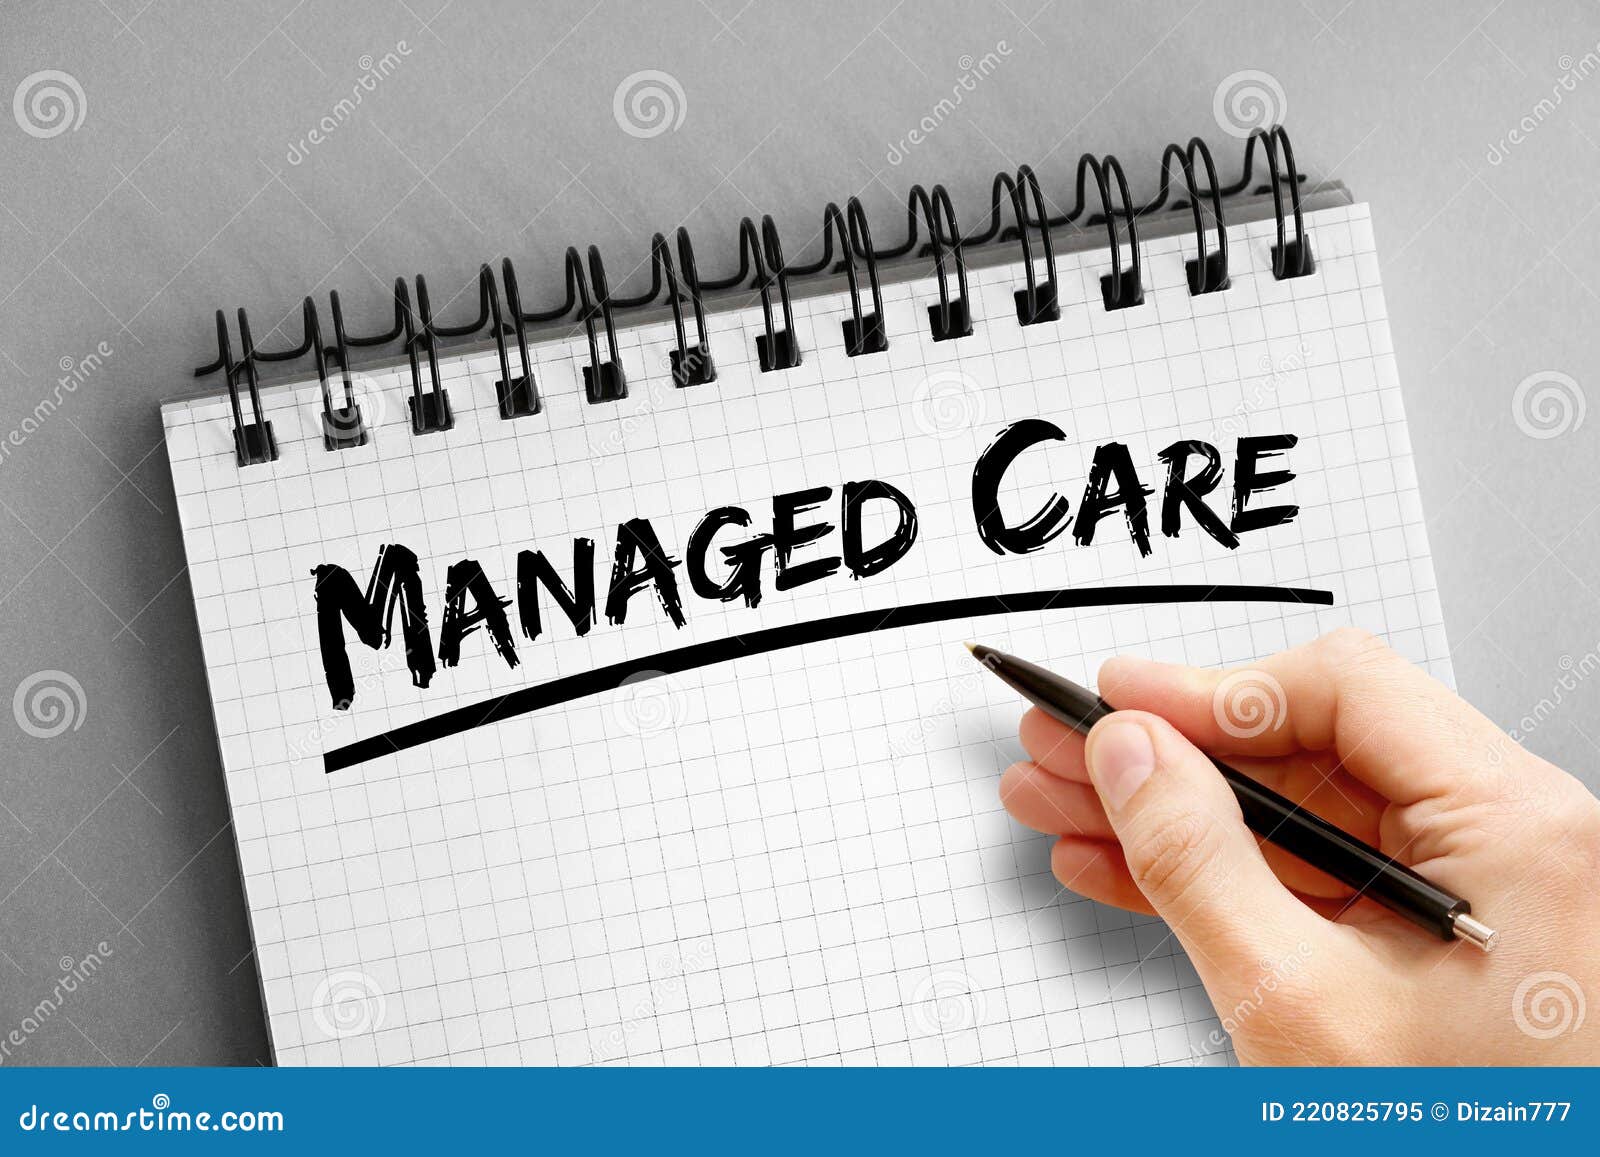 managed care text on notepad, concept background